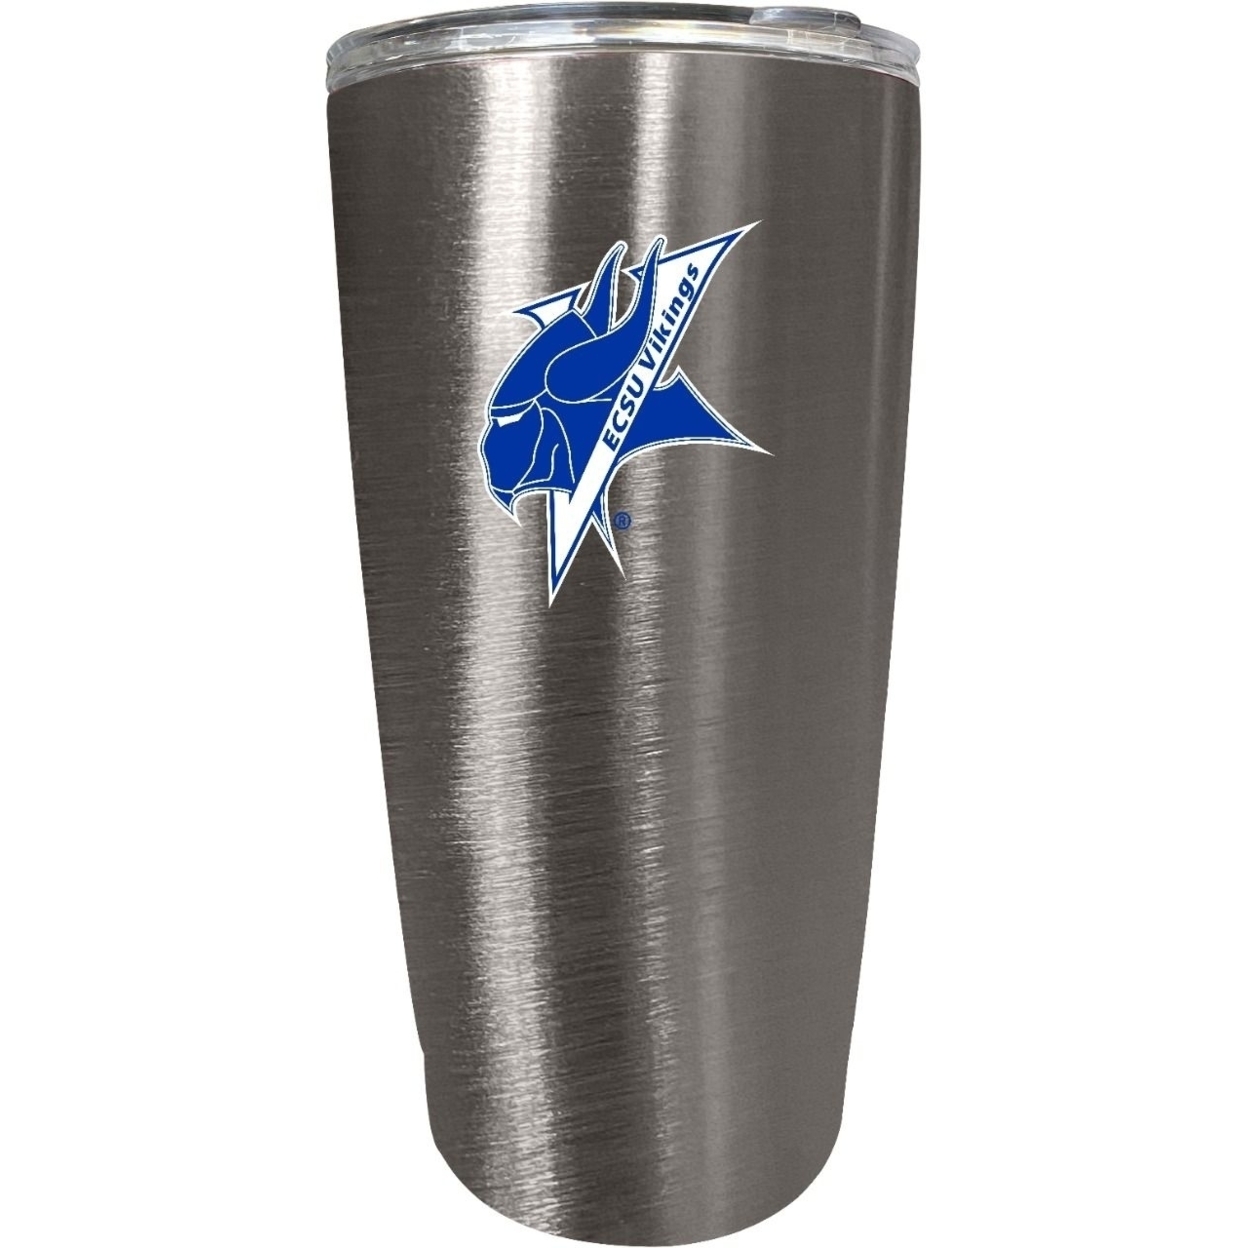 Elizabeth City State University 16 Oz Insulated Stainless Steel Tumbler Colorless